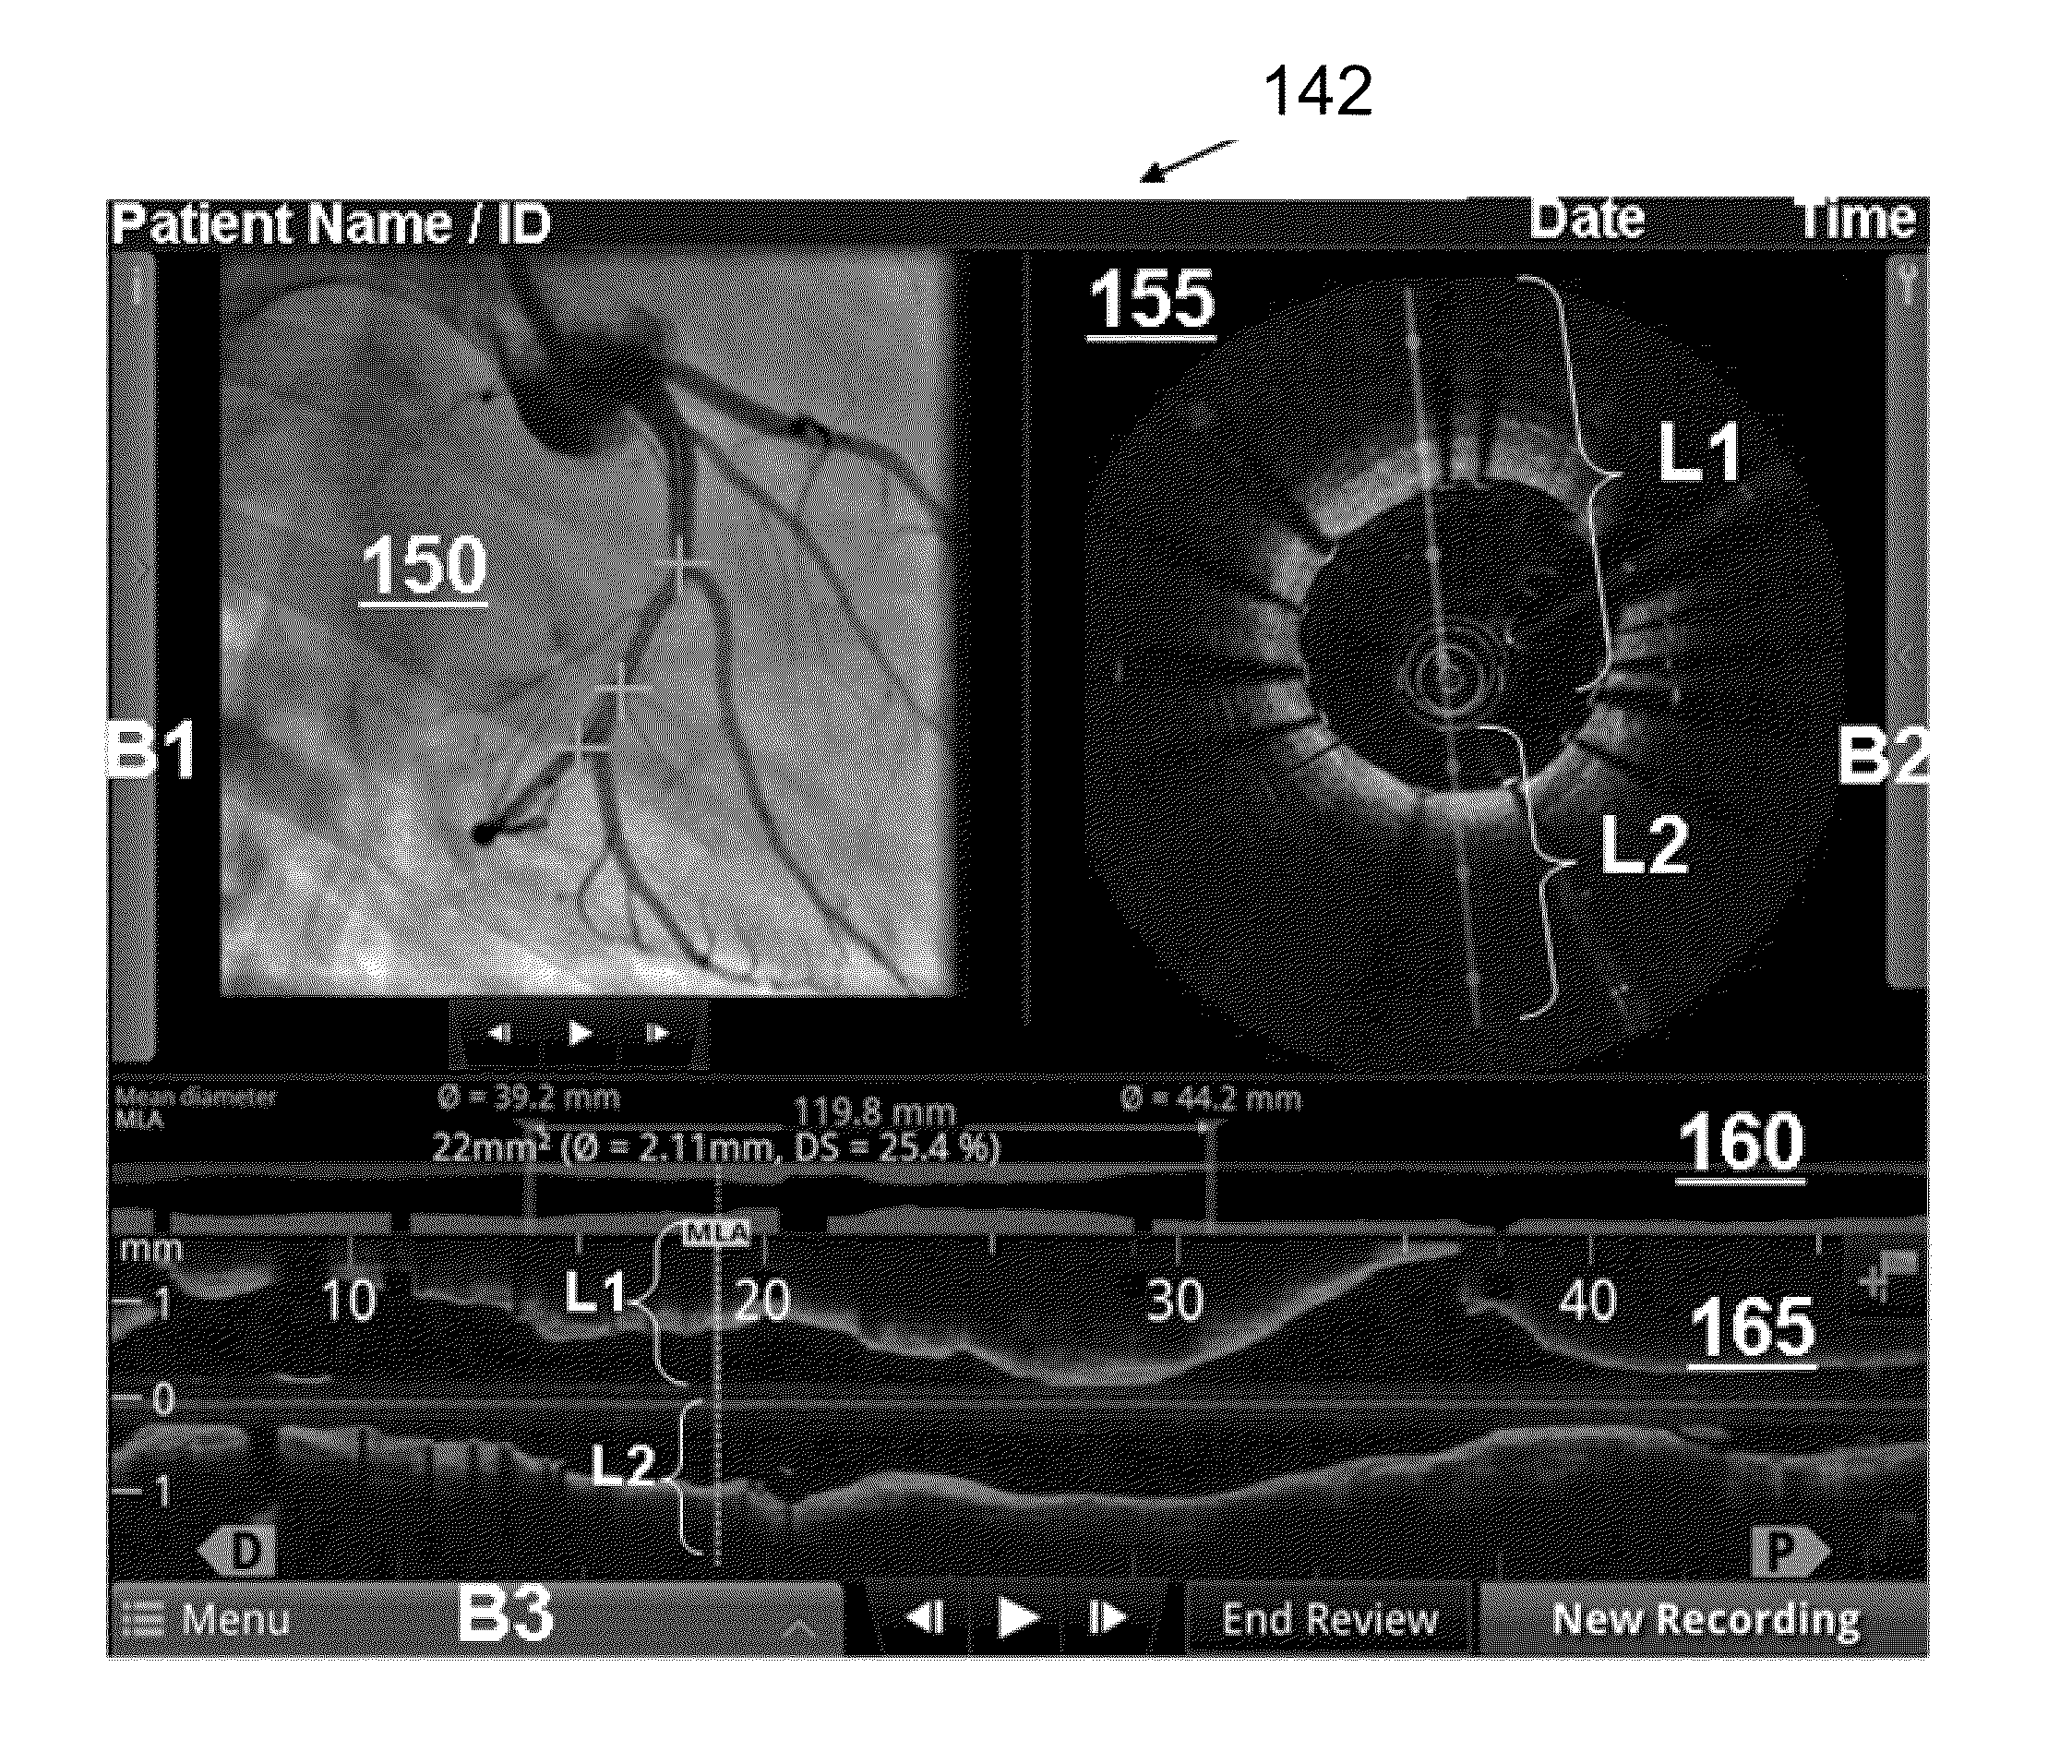 Vascular data processing and image registration systems, methods, and apparatuses